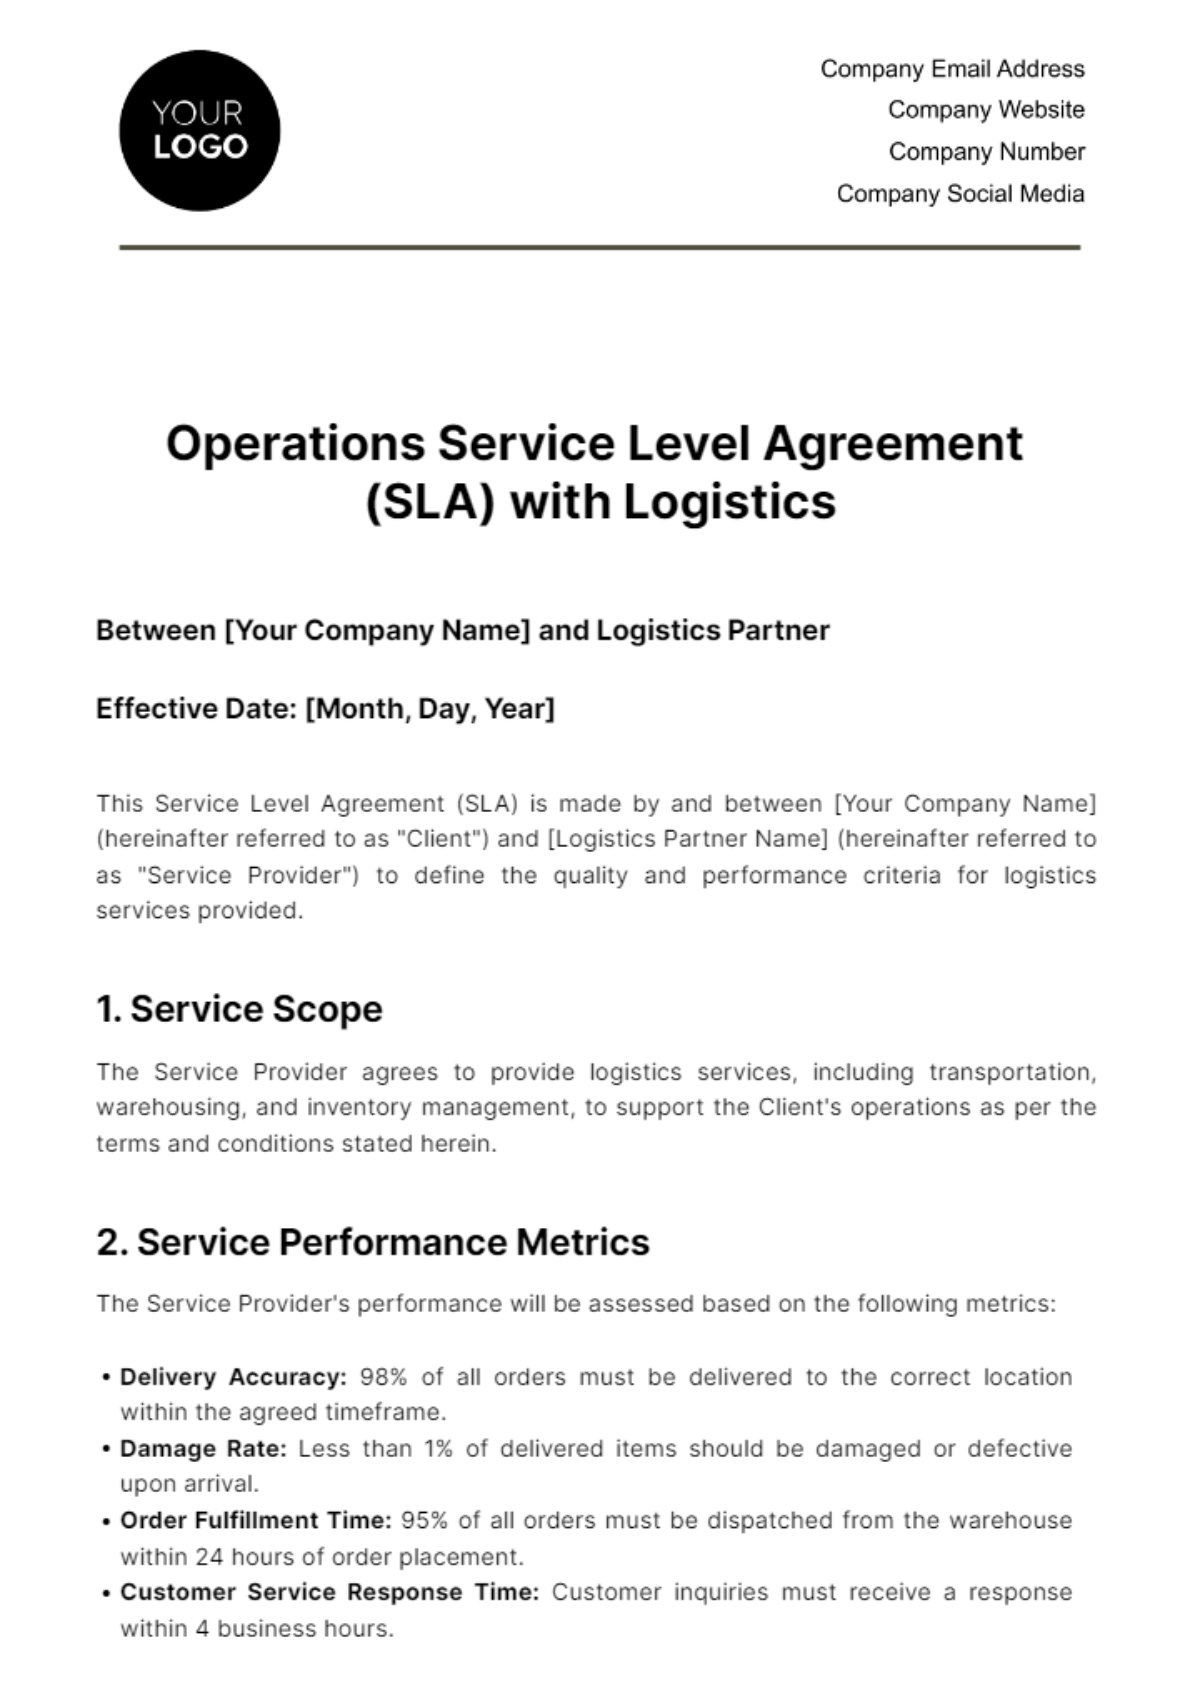 Operations Service Level Agreement (SLA) with Logistics Template